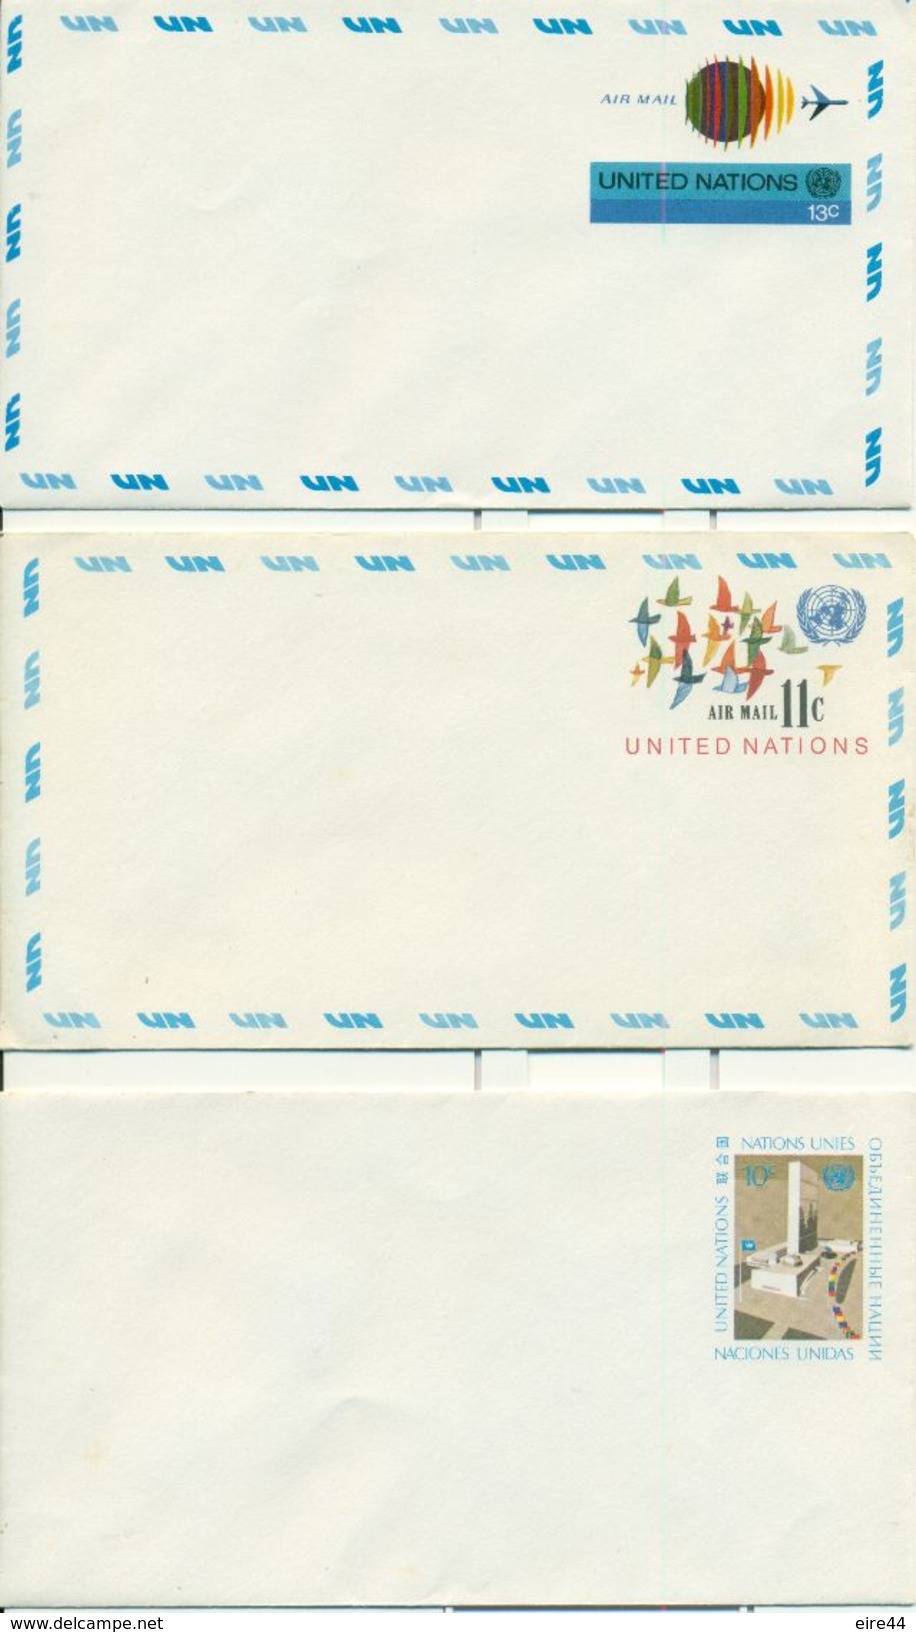 United Nations New York  9  Postcards Mint Airmail Postal Stationery - Luchtpost